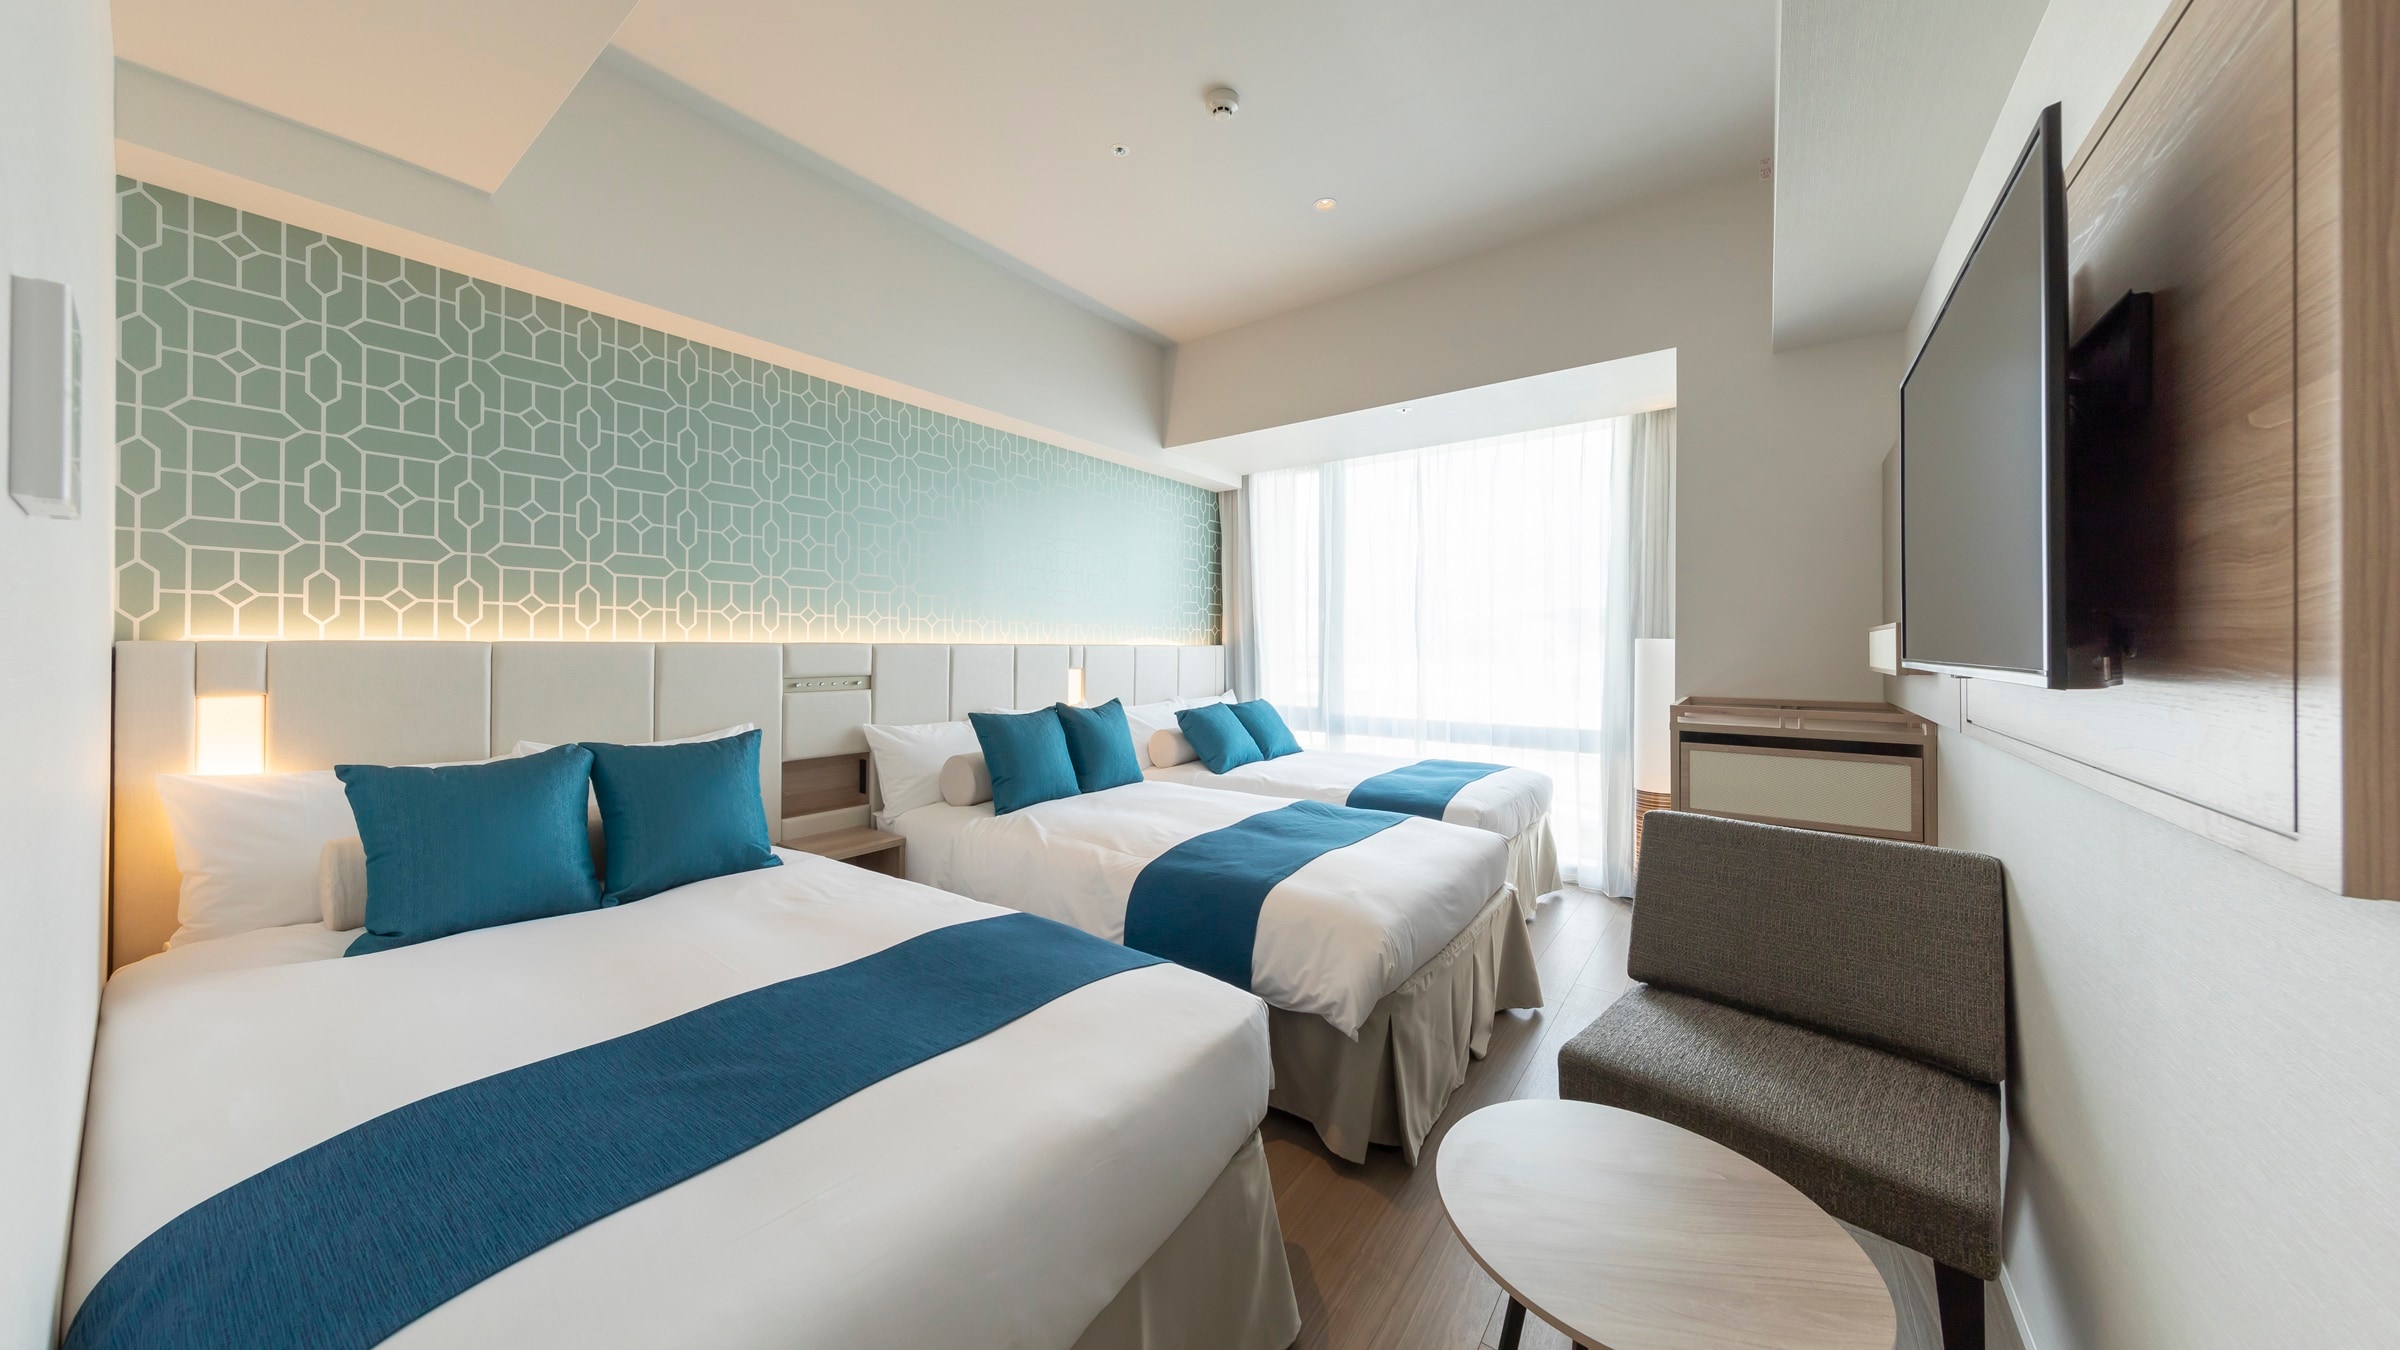 [Standard Twin + Extra Bed] Up to 3 people including extra bed can stay.